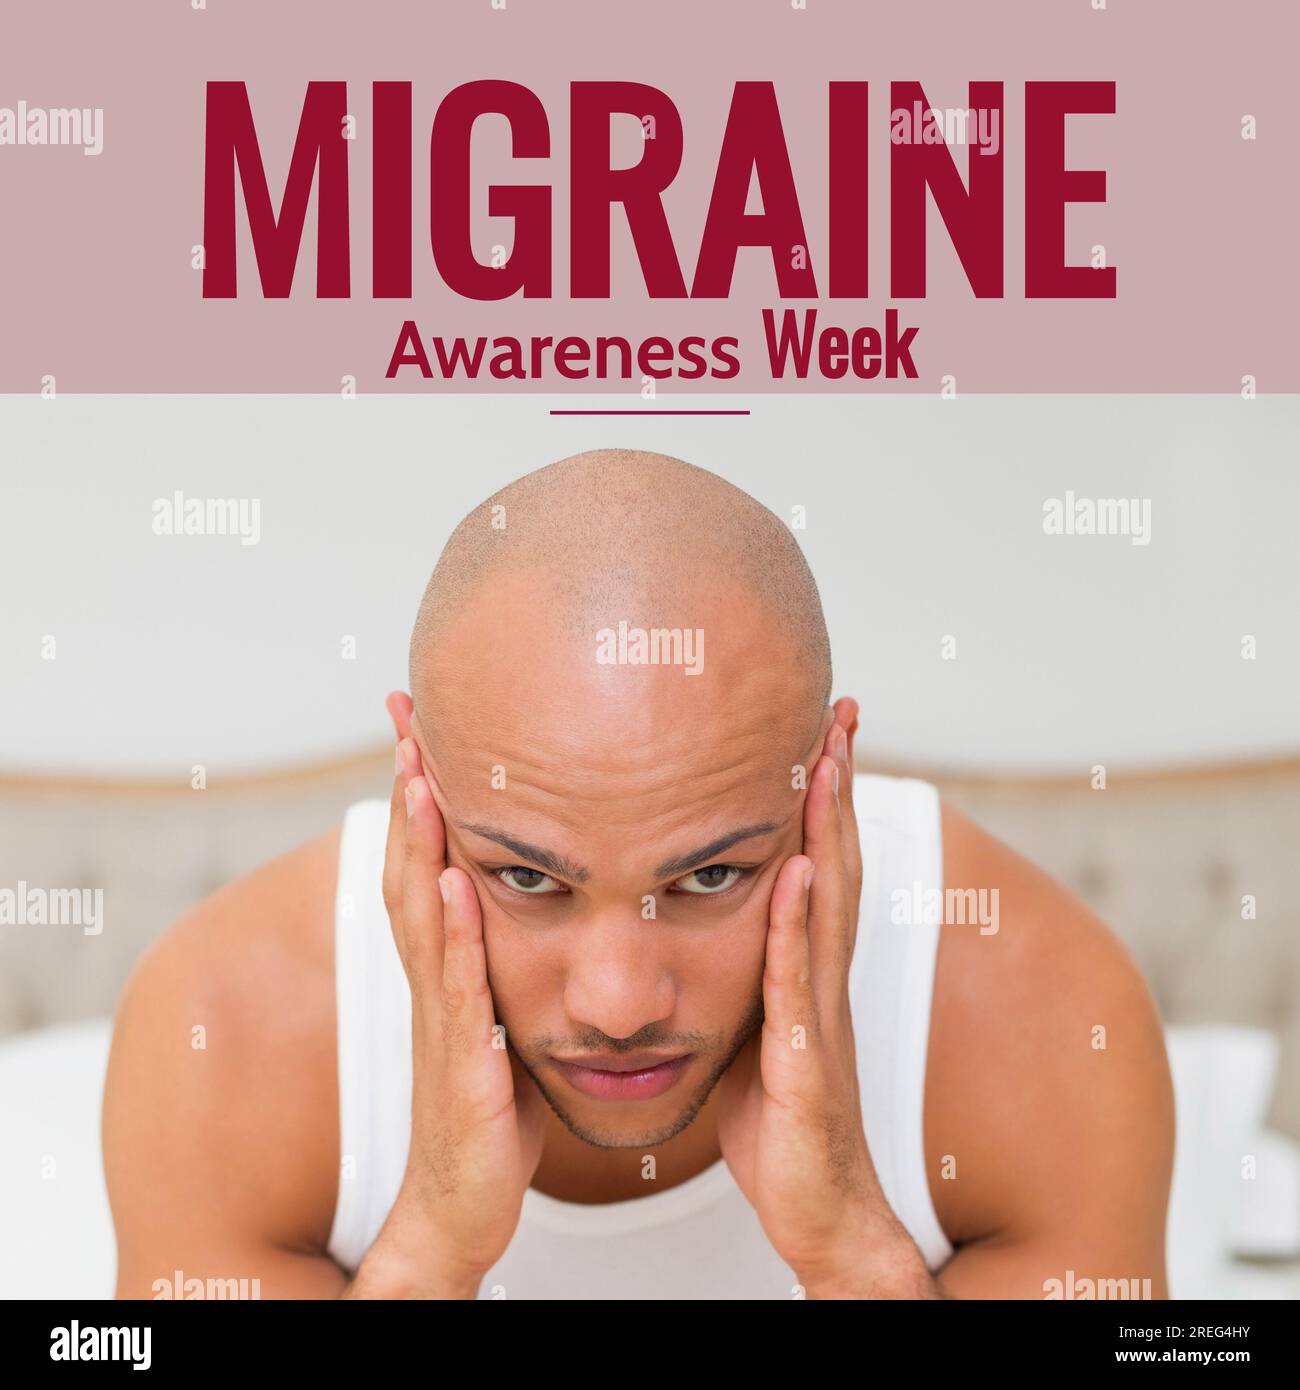 Migraine awareness week text in red over bald biracial man holding head in pain Stock Photo